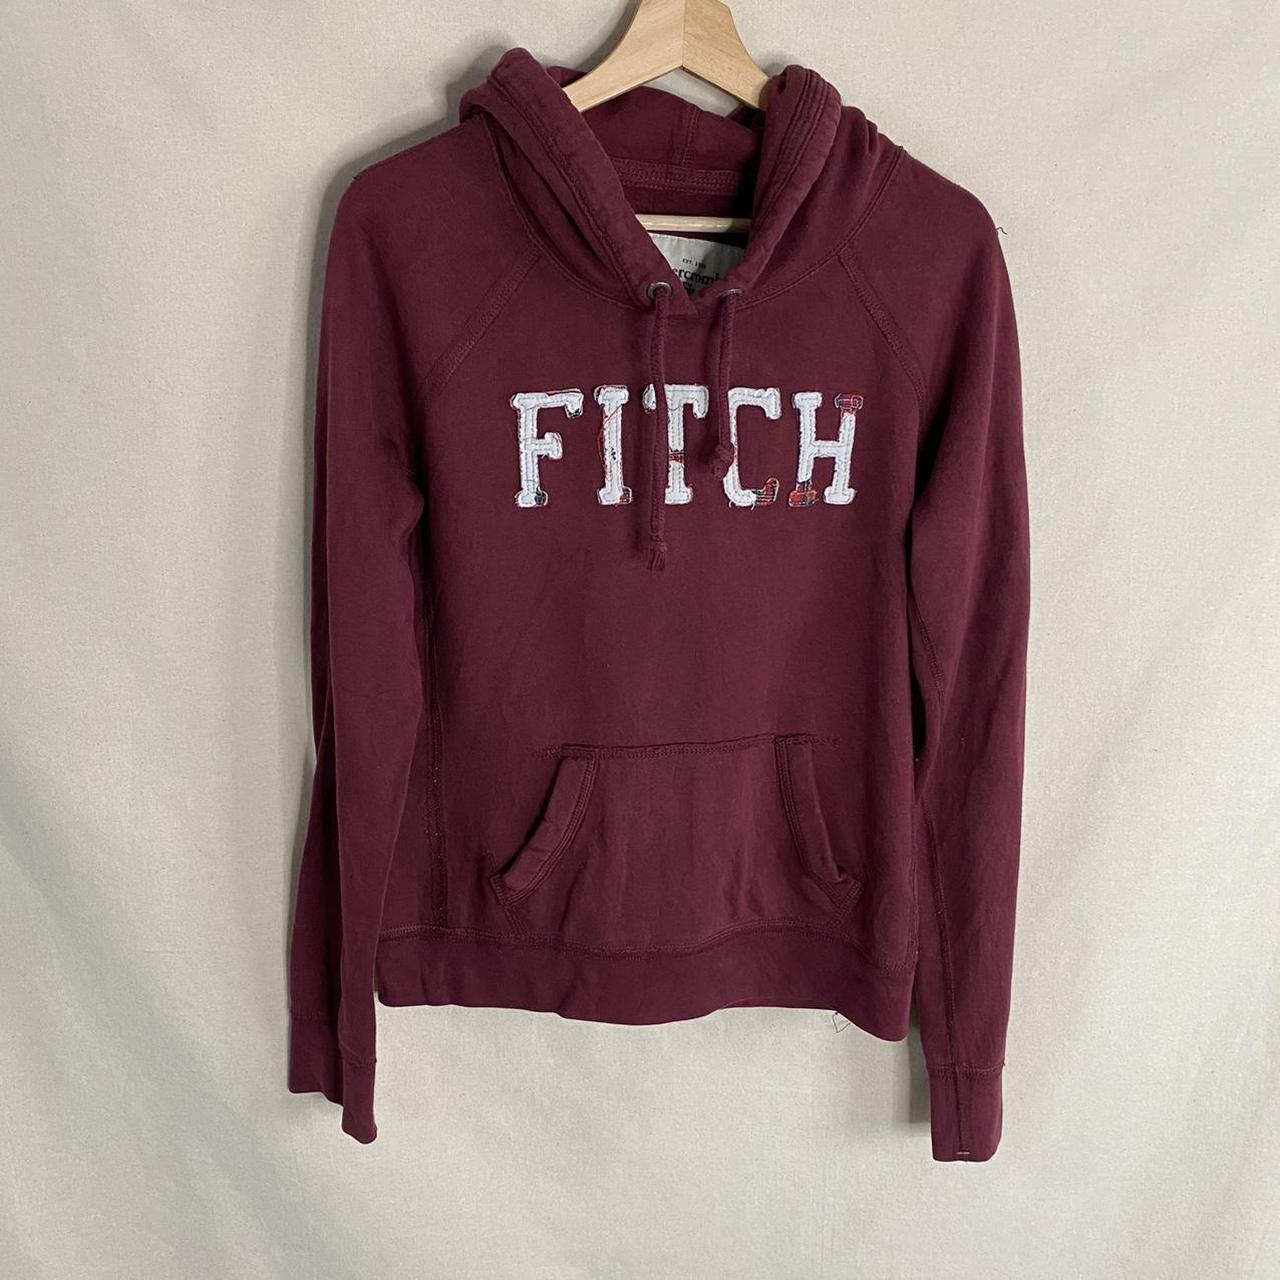 Abercrombie & Fitch Women's Burgundy and White Hoodie | Depop